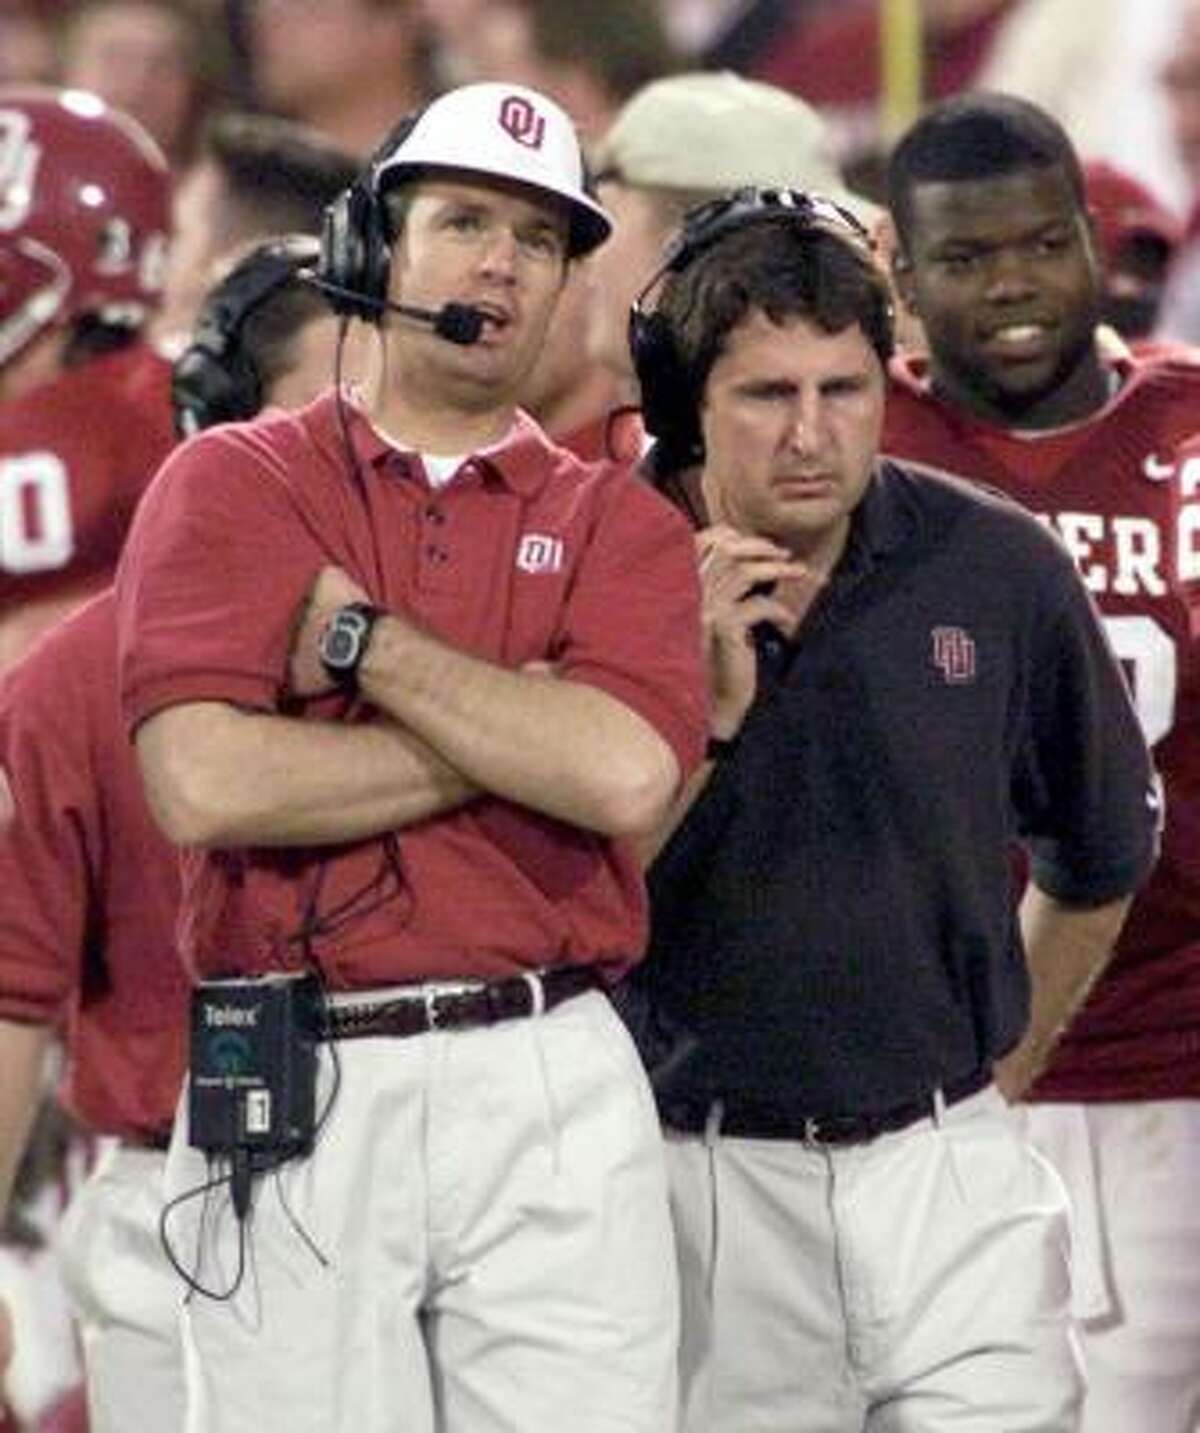 After spending two seasons as an assistant under Bob Stoops at Oklahoma, Mike Leach was hired in 1999 to replace Spike Dykes, who retired after 13 seasons in Lubbock. "Everybody knows that the greatest football of all is in the state of Texas, so it's great to be a part of that," Leach said at his introductory news conference.